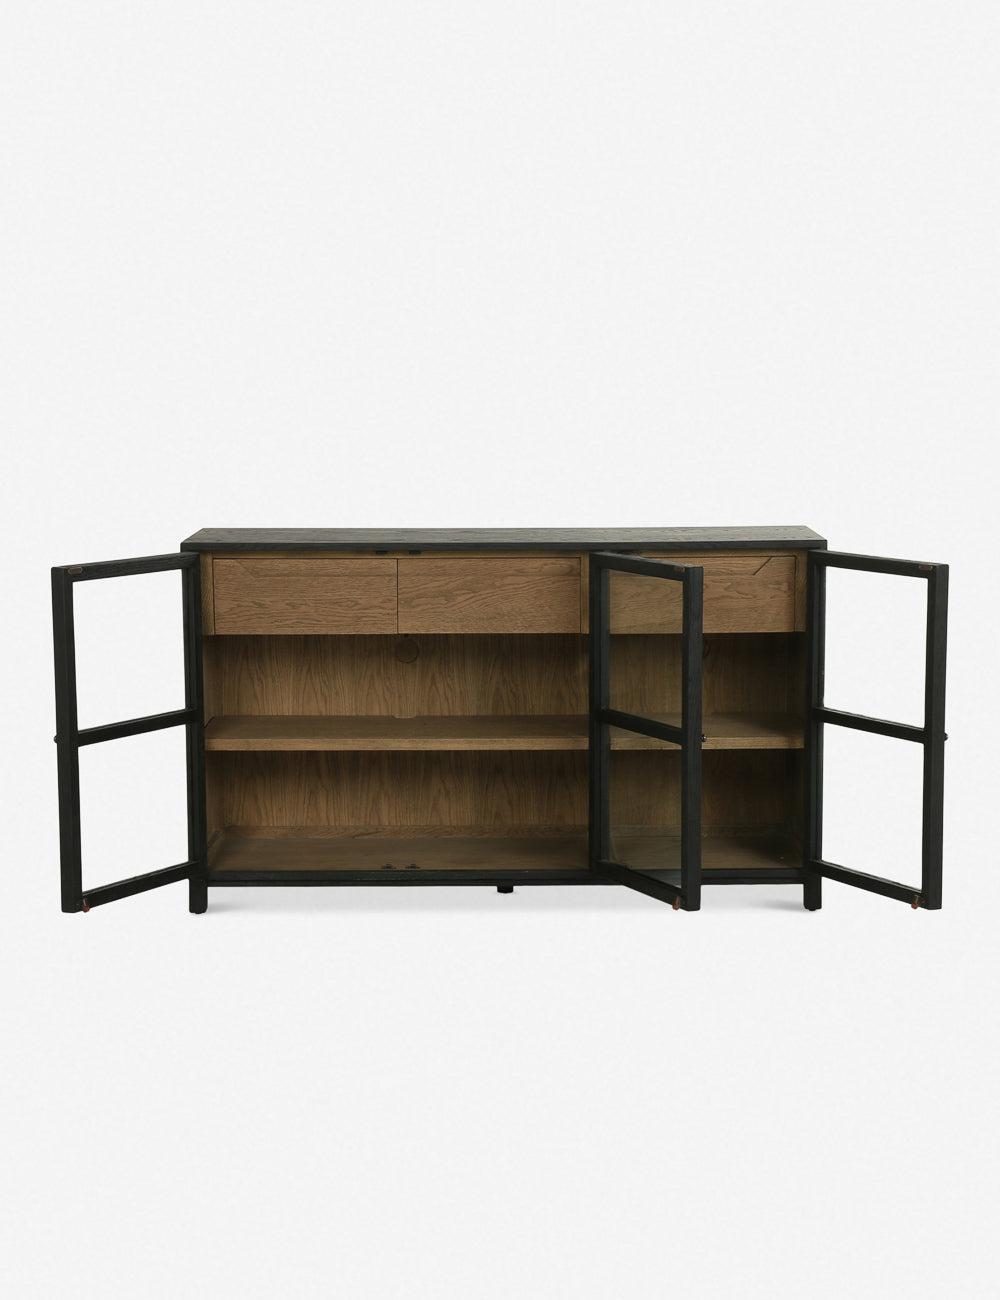 Millie Contemporary Black Oak 59'' Sideboard with Glass Doors